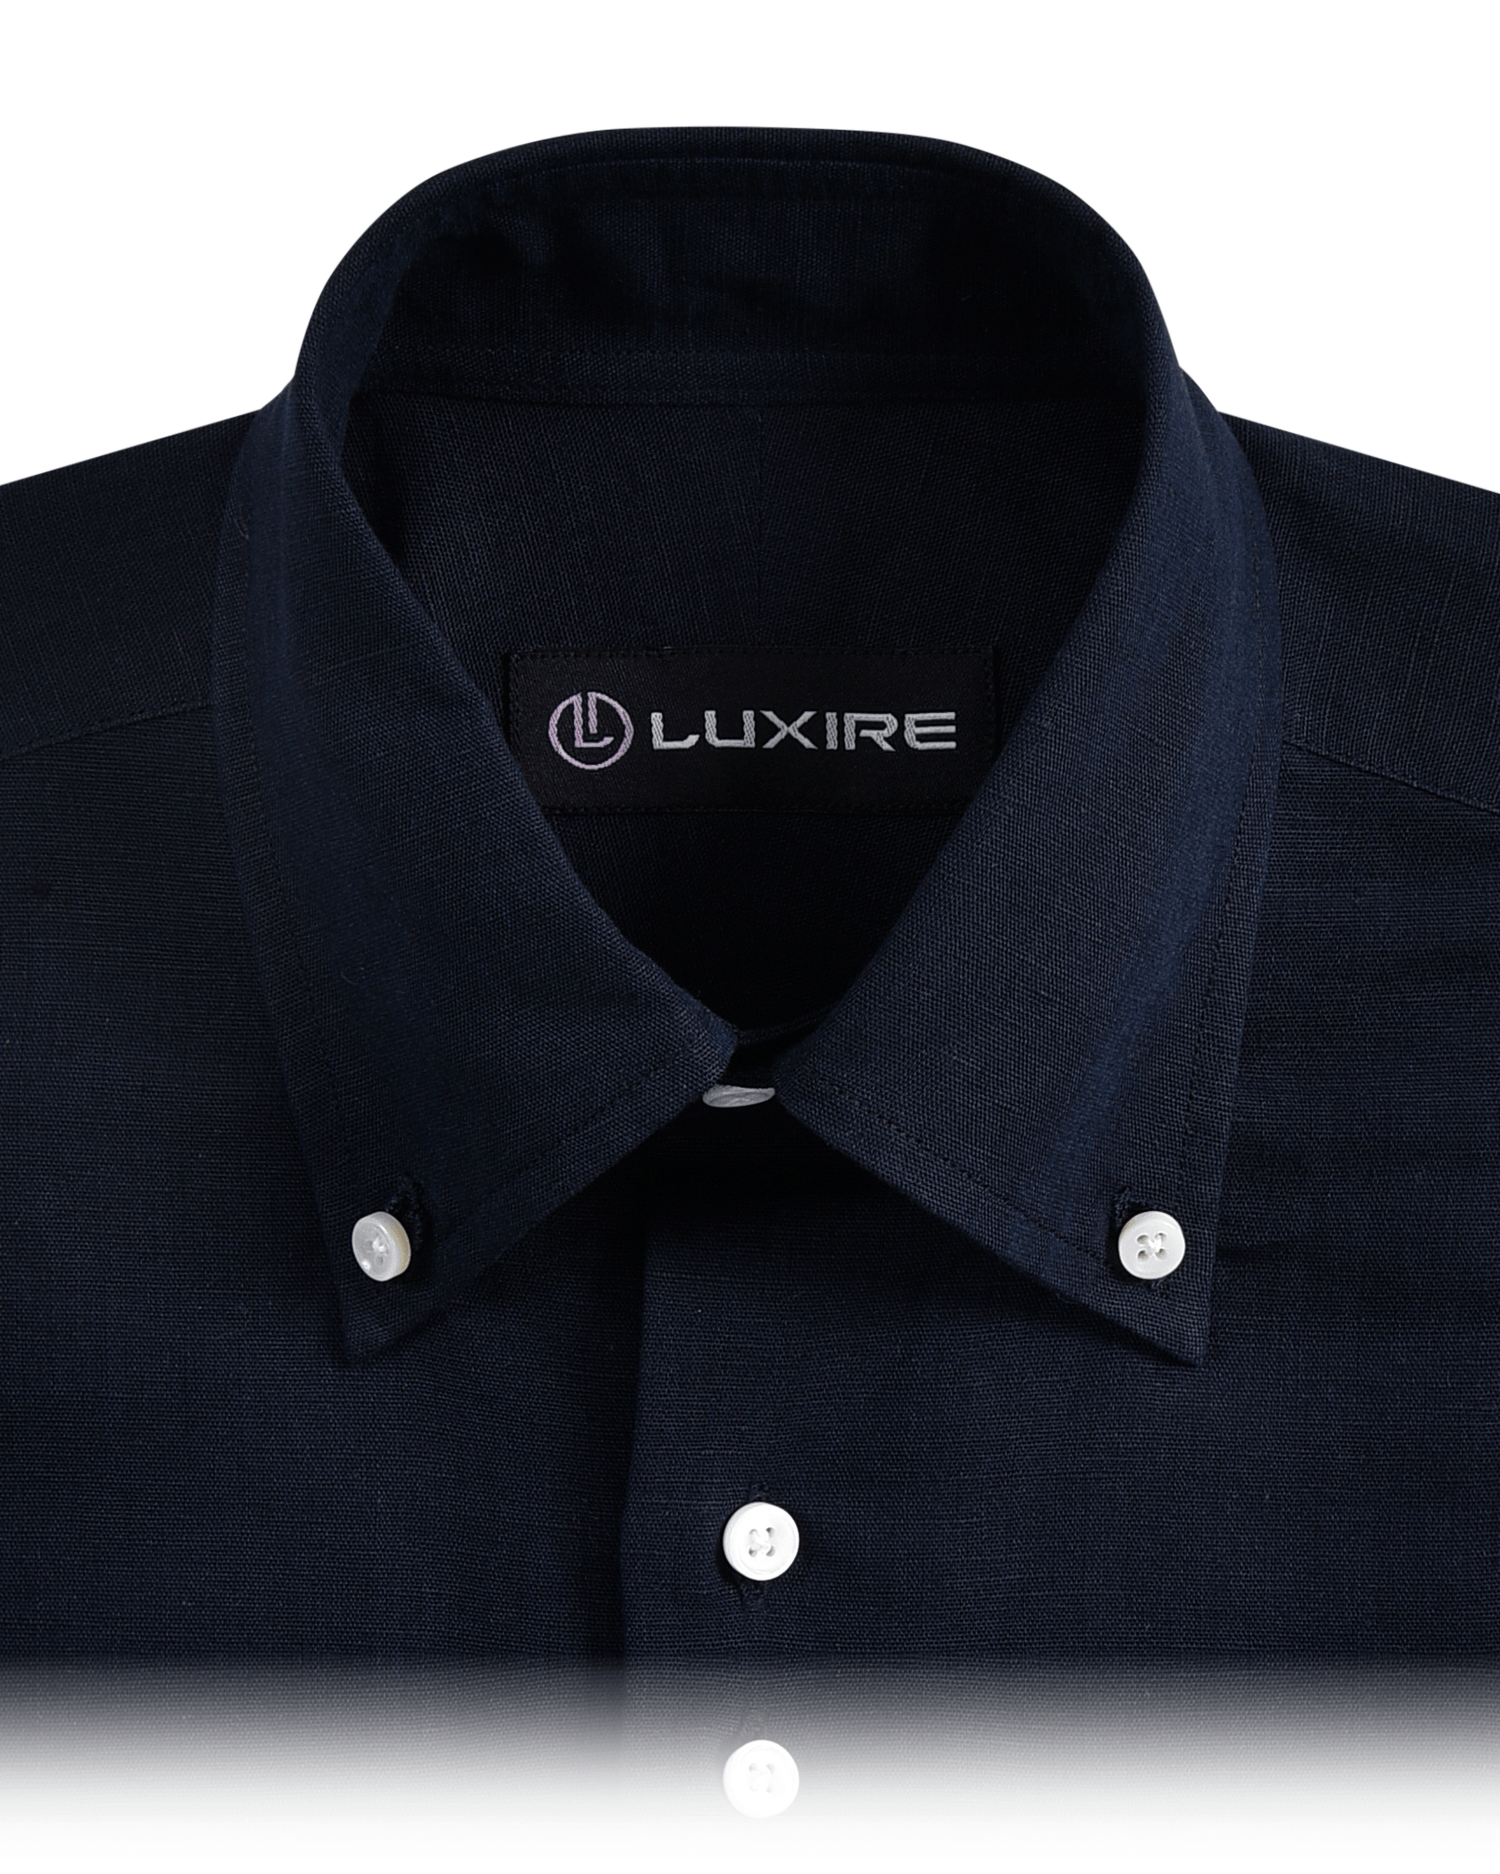 Collar of the custom linen shirt for men in navy blue by Luxire Clothing